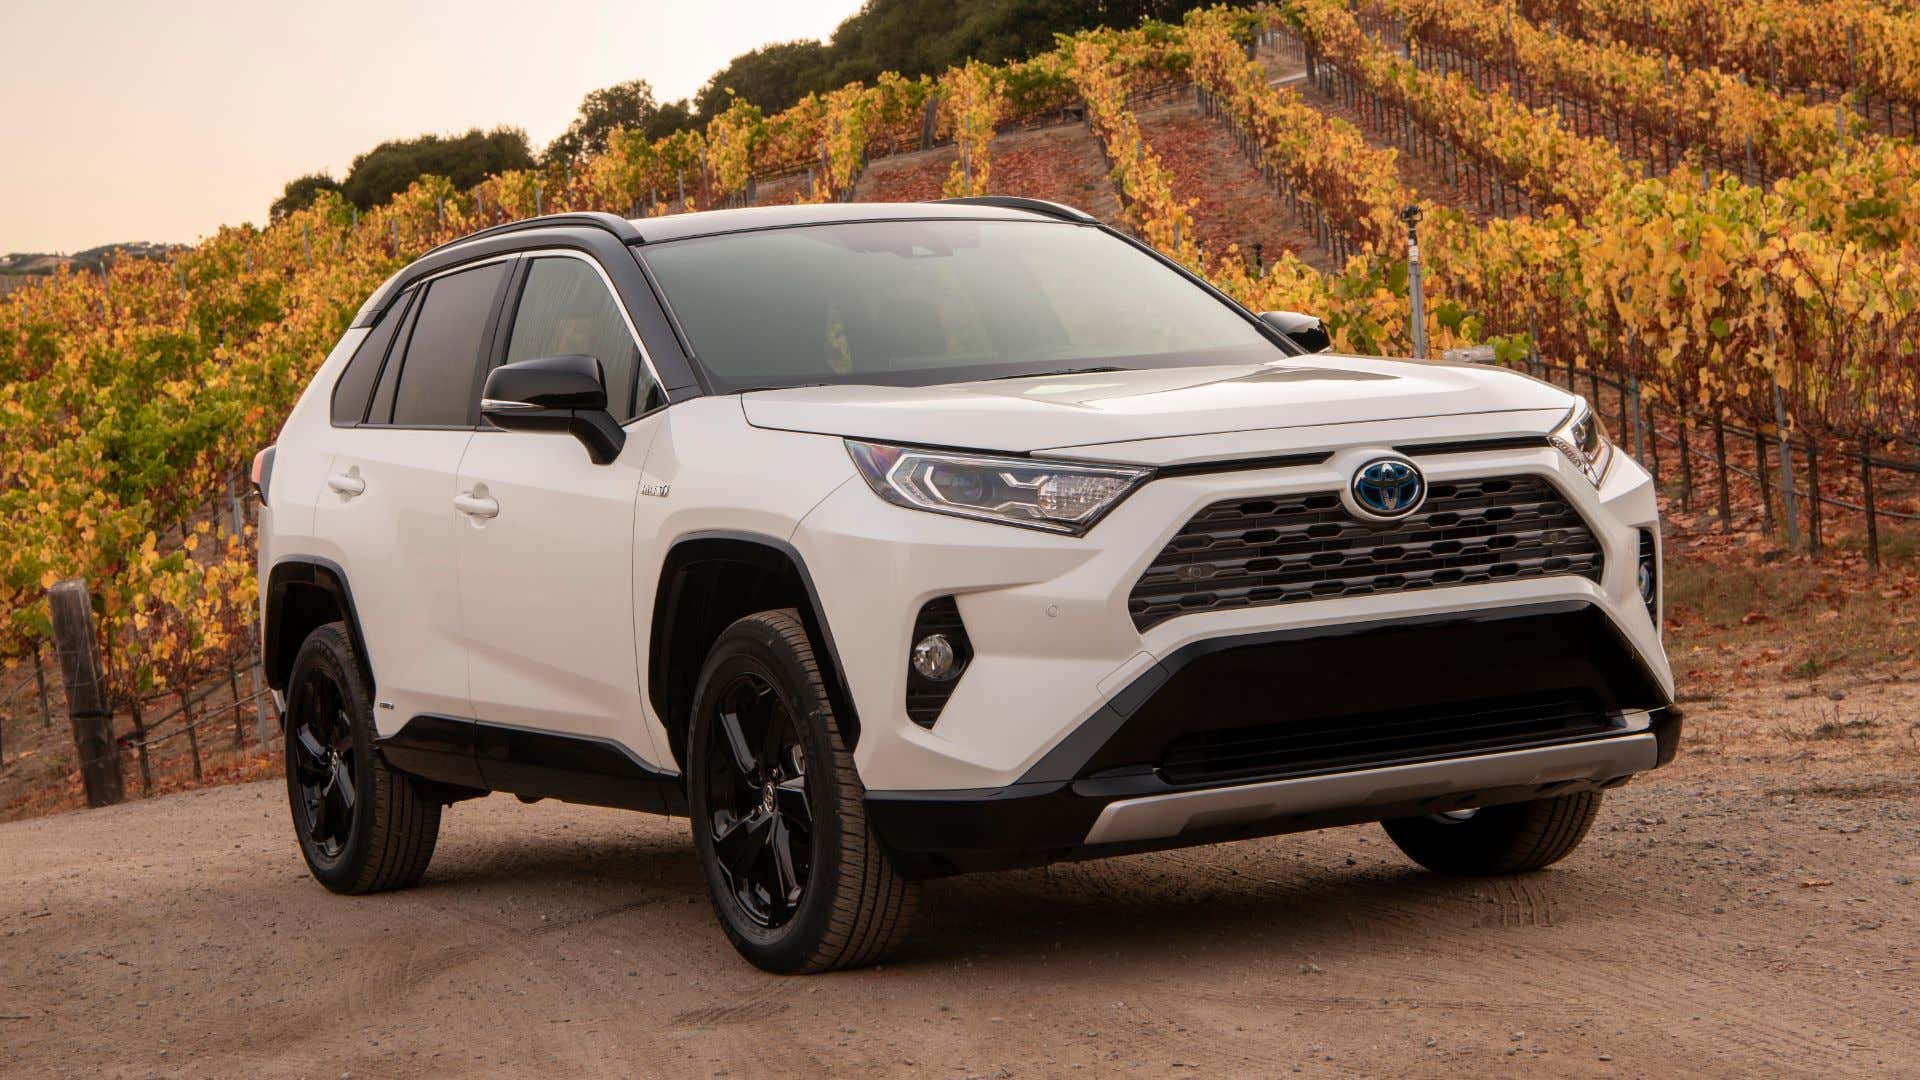 A Toyota RAV4 Hybrid in the wilds of wine country. Must be nice. 